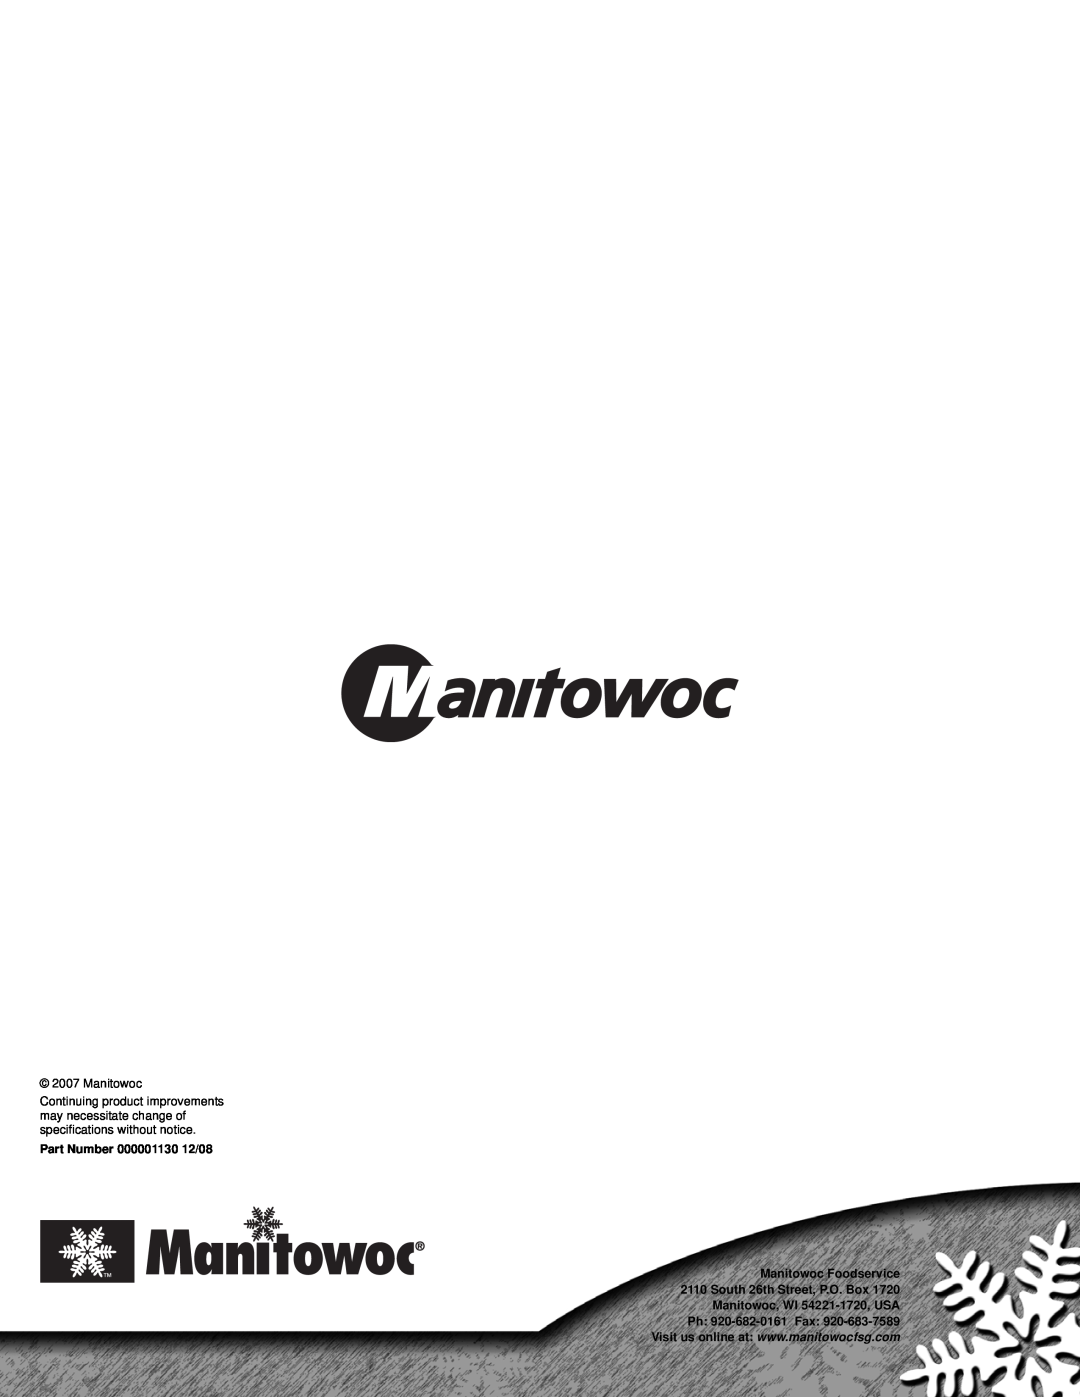 Manitowoc Ice Q130 manual Part Number 000001130 12/08 Manitowoc Foodservice, Ph 920-682-0161 Fax 